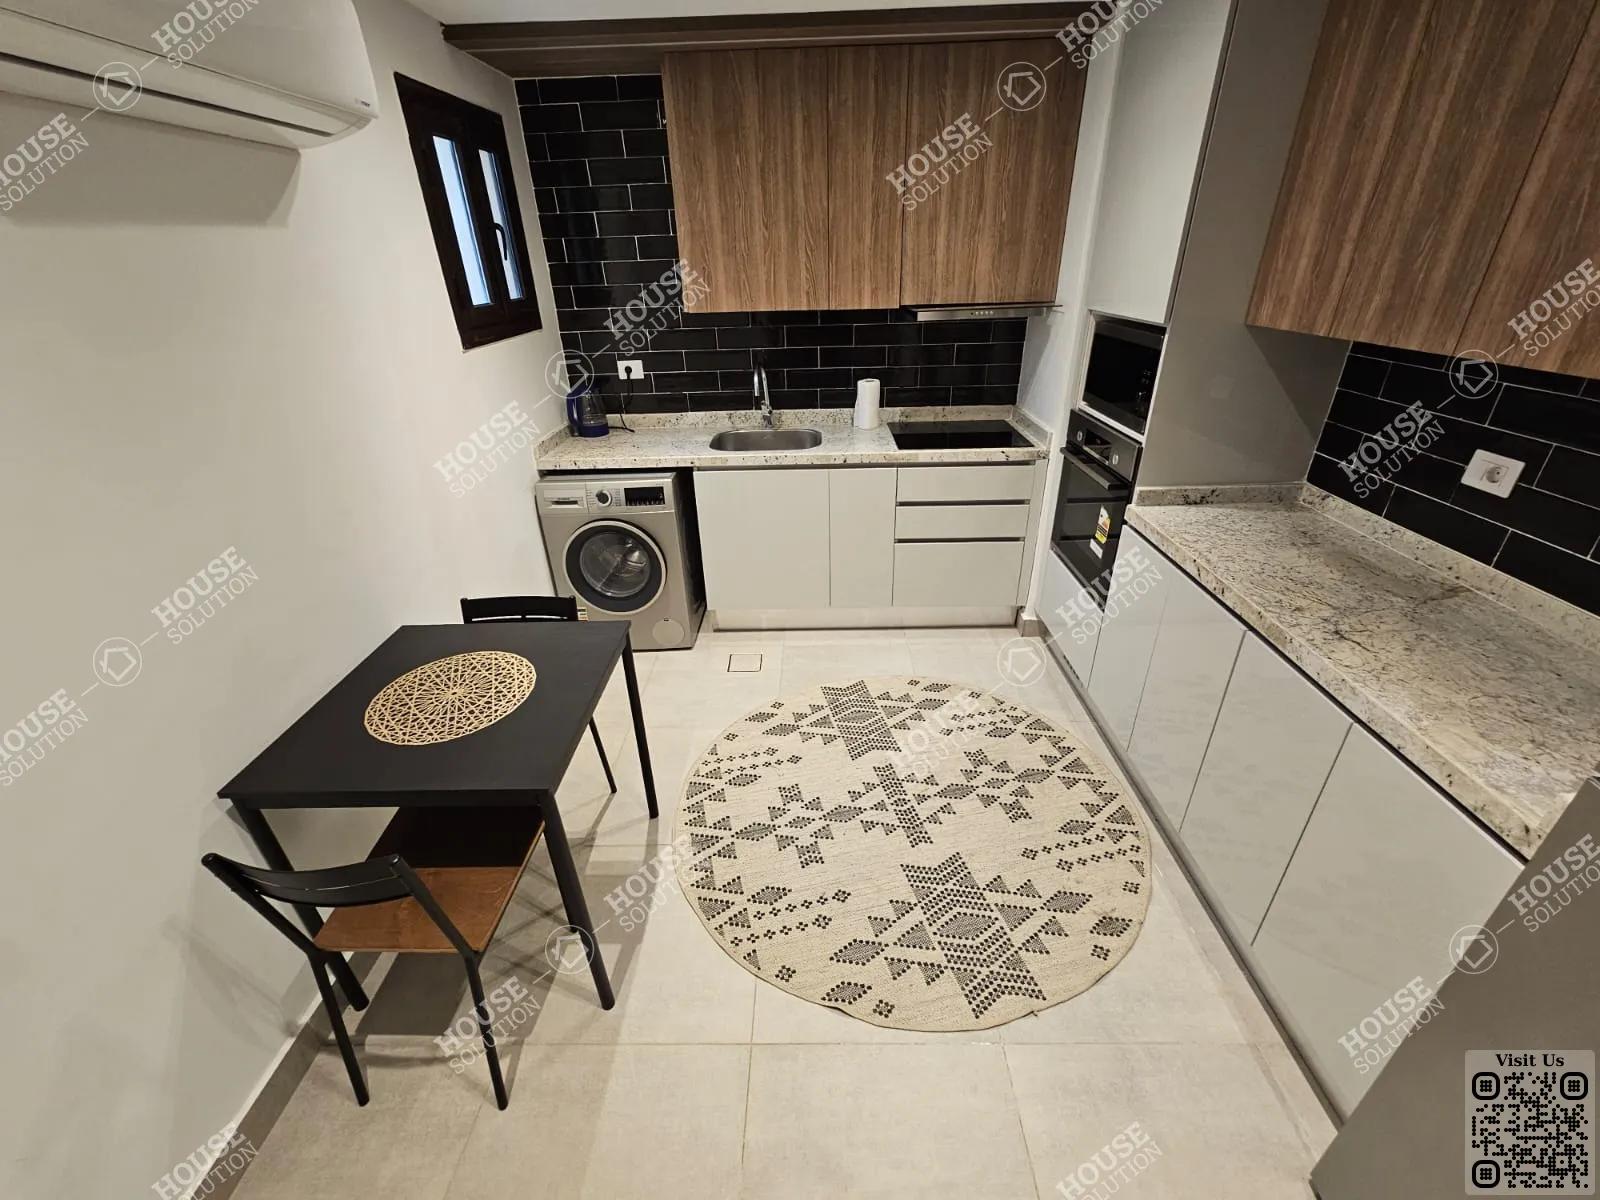 KITCHEN  @ Apartments For Rent In Maadi Maadi Sarayat Area: 165 m² consists of 3 Bedrooms 4 Bathrooms Modern furnished 5 stars #5790-2